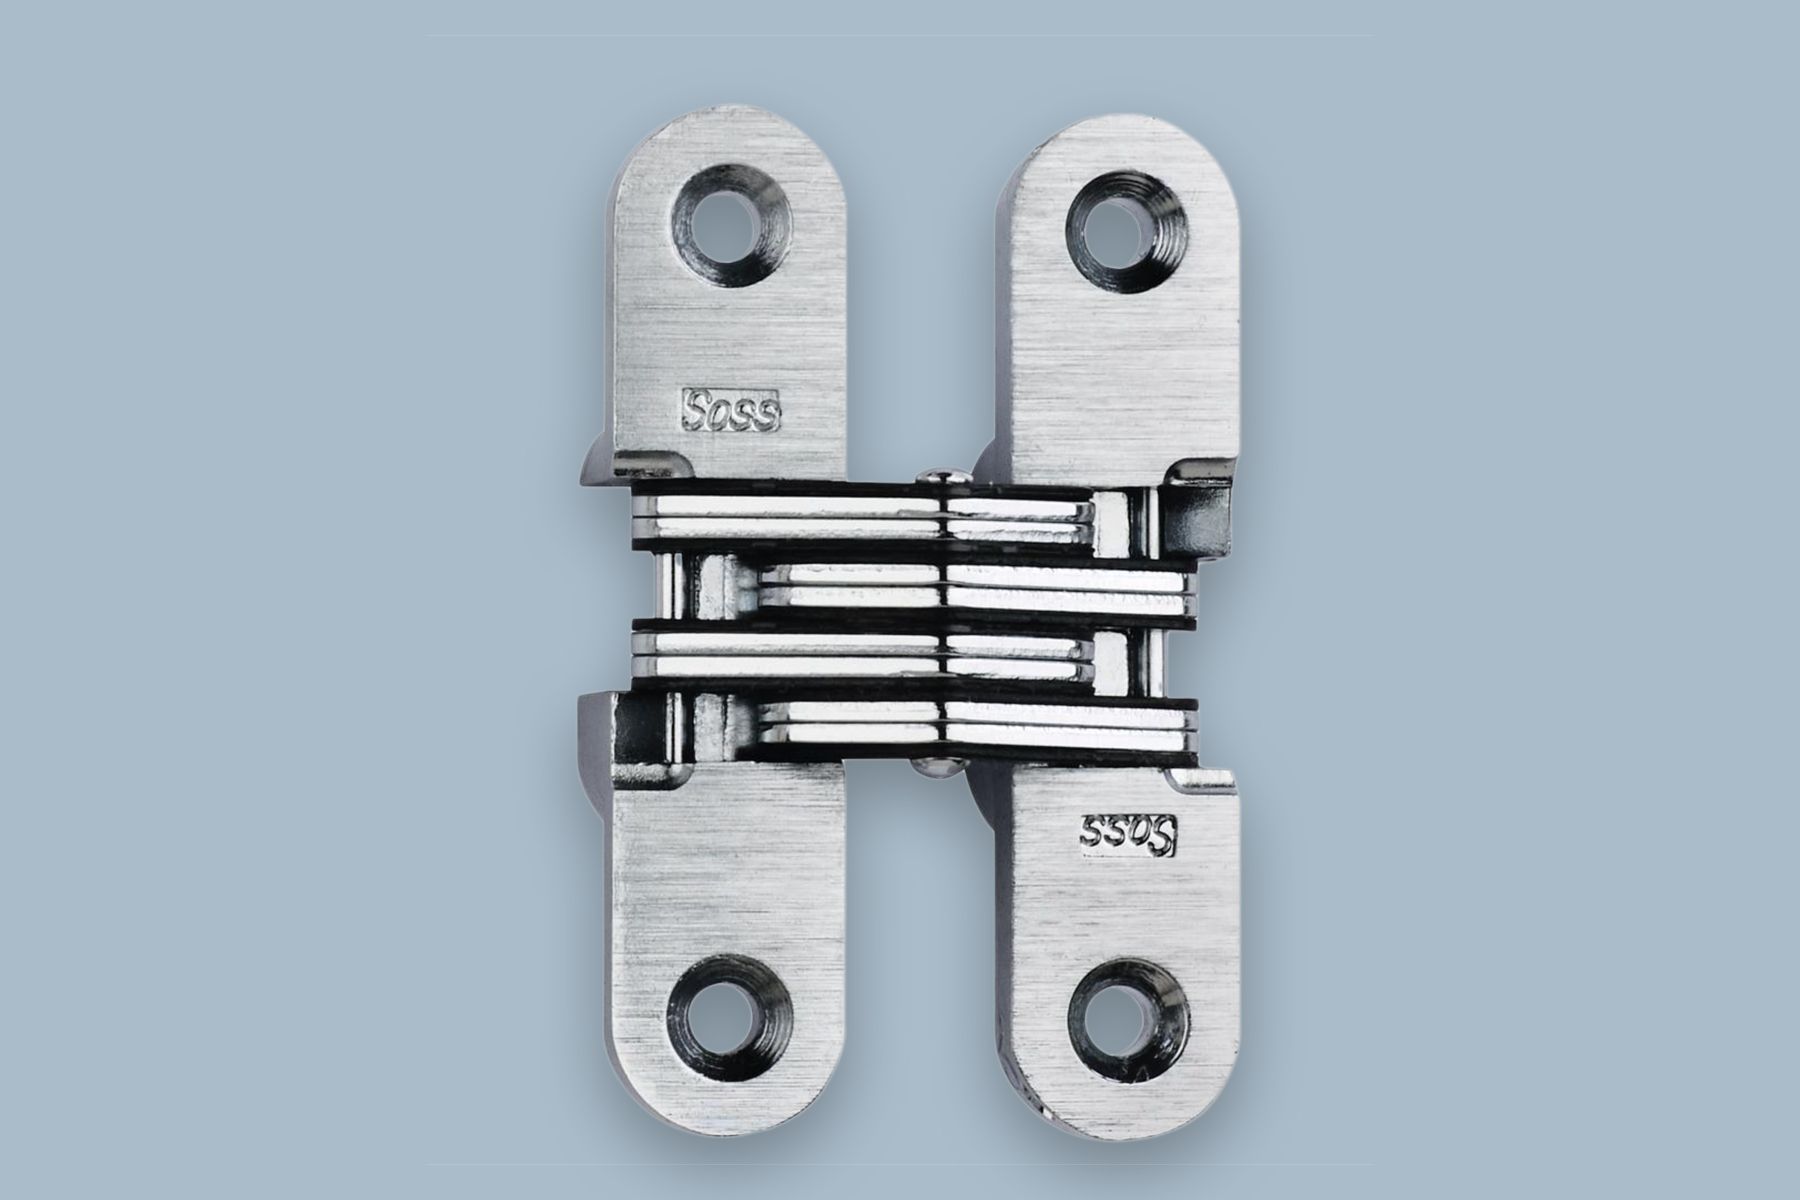 HERE'S HOW: Select the proper type of hinges